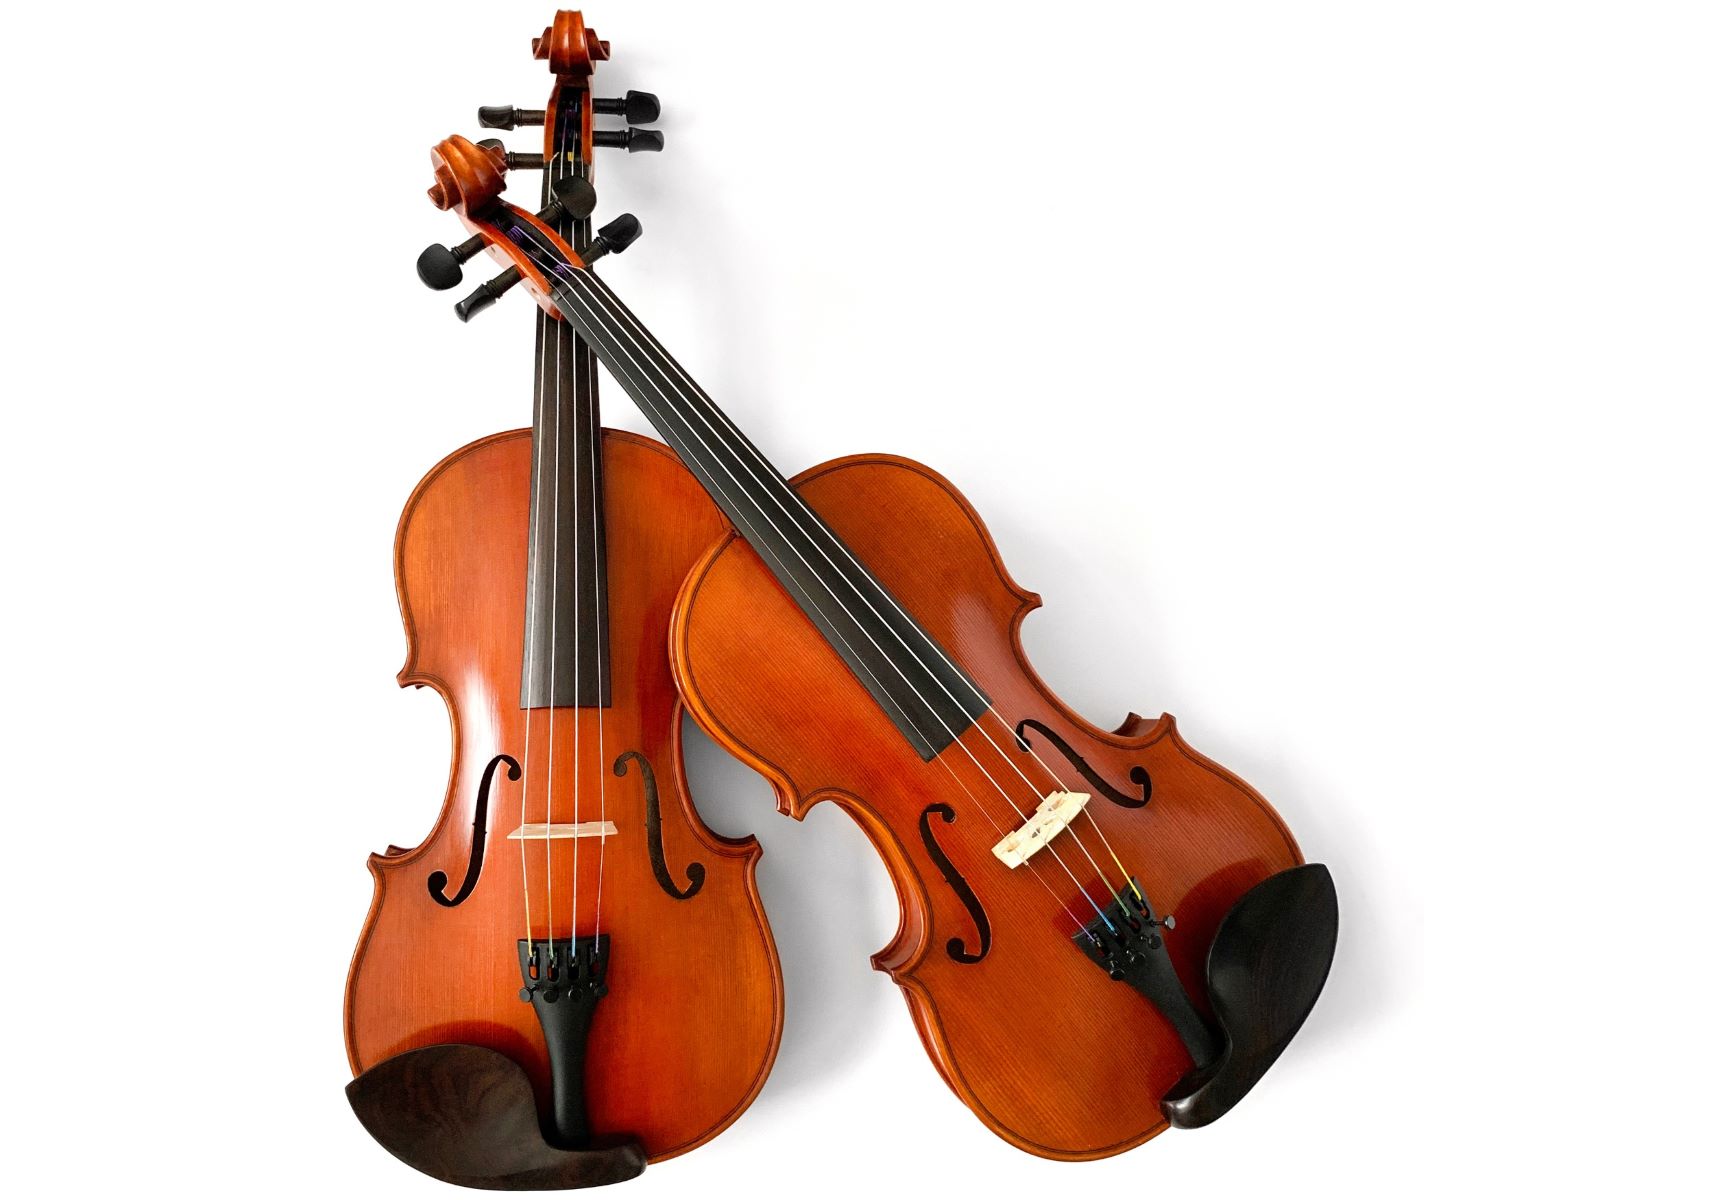 Violin Review: Unbiased Analysis and Recommendations